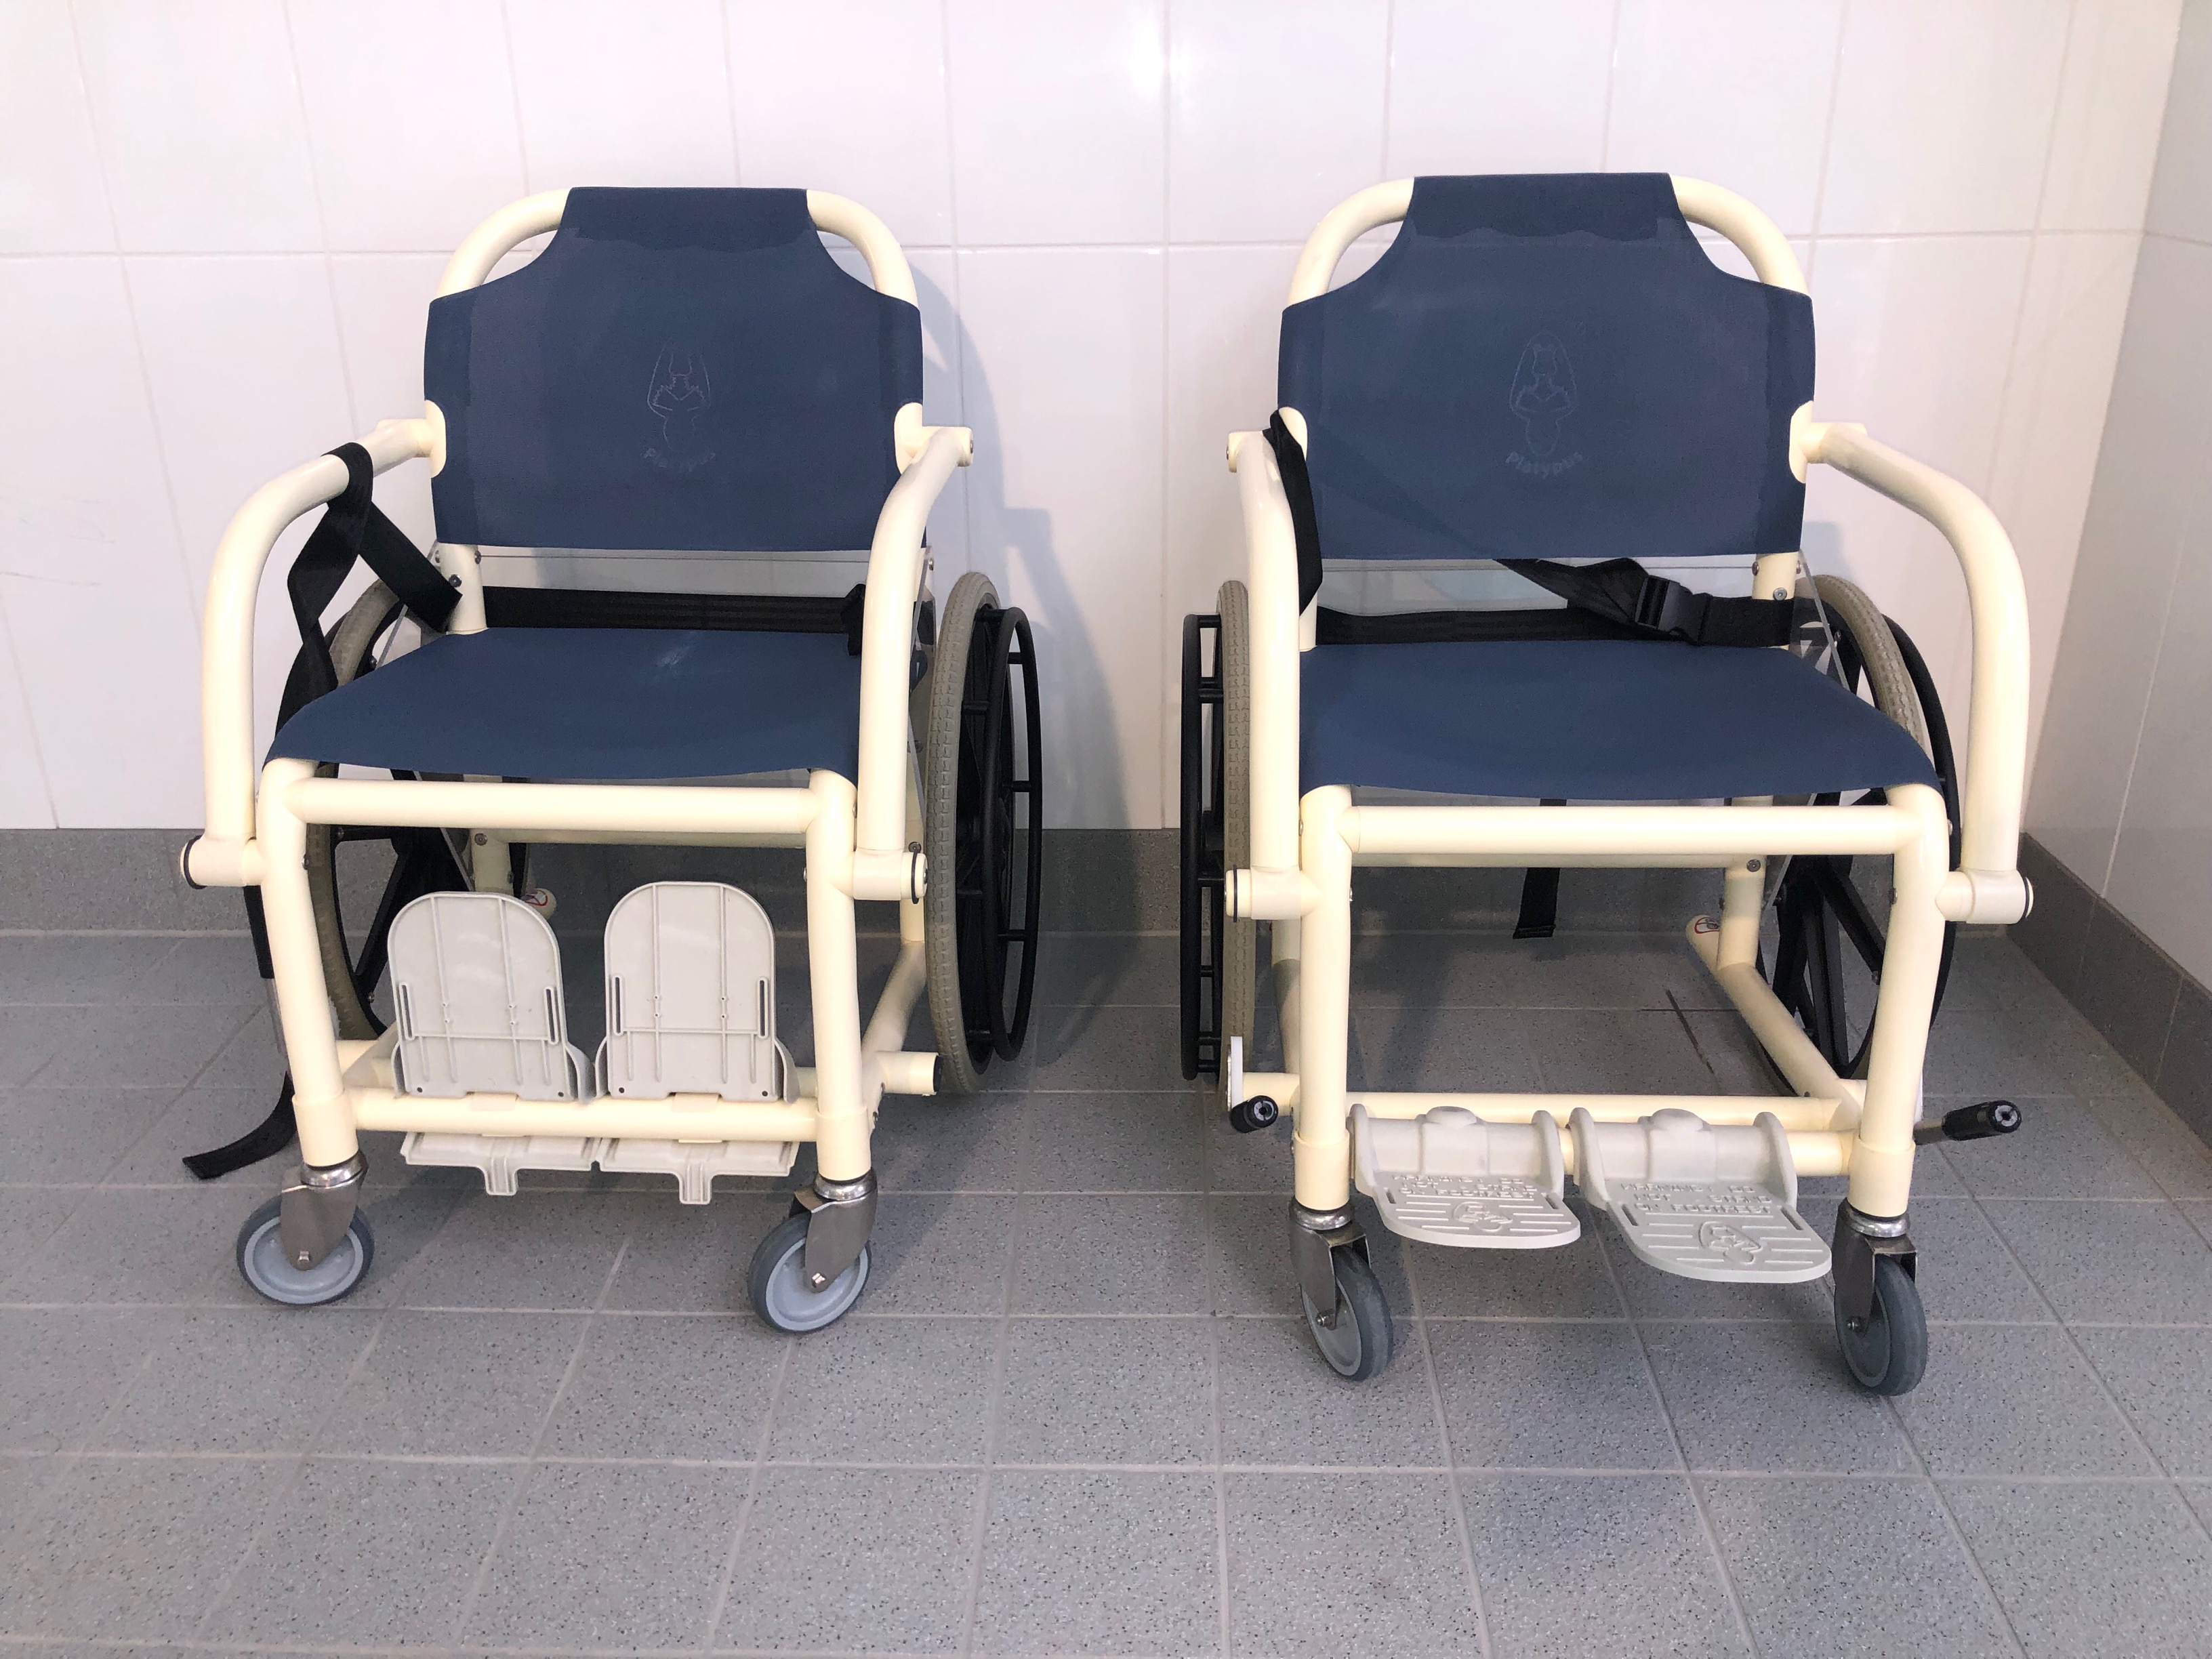 Image of 2 aquatic wheelchairs available for use at the facility